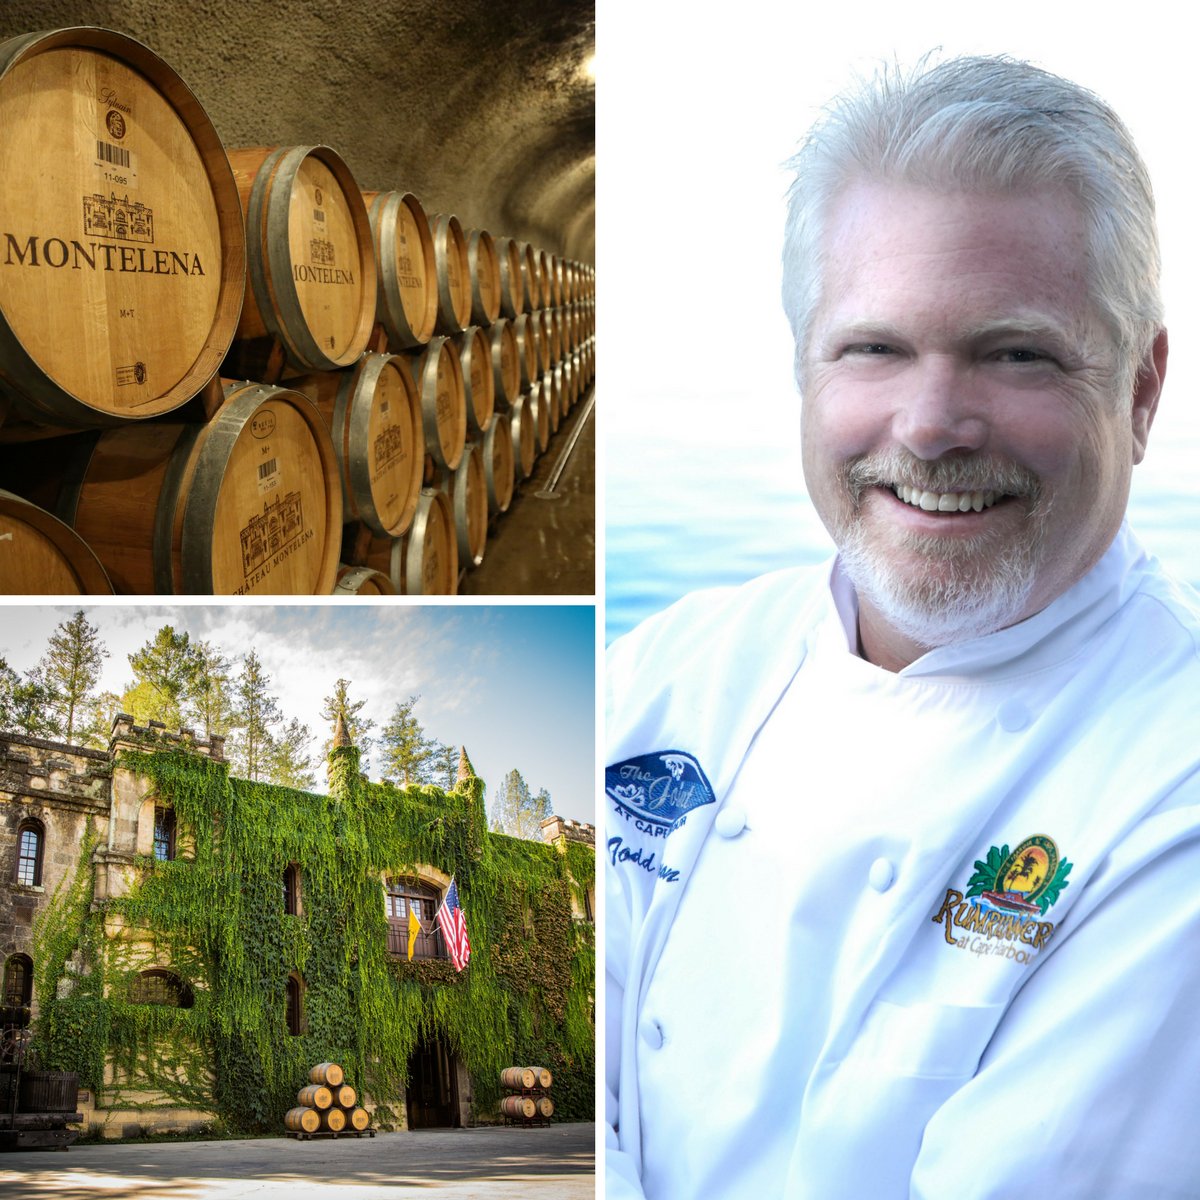 Bid on an in-home 5-course dinner for 12 by Chef Johnson of Rumrunners, with award-winning wines from #ChateauMontelena at #SWFLWineFest.